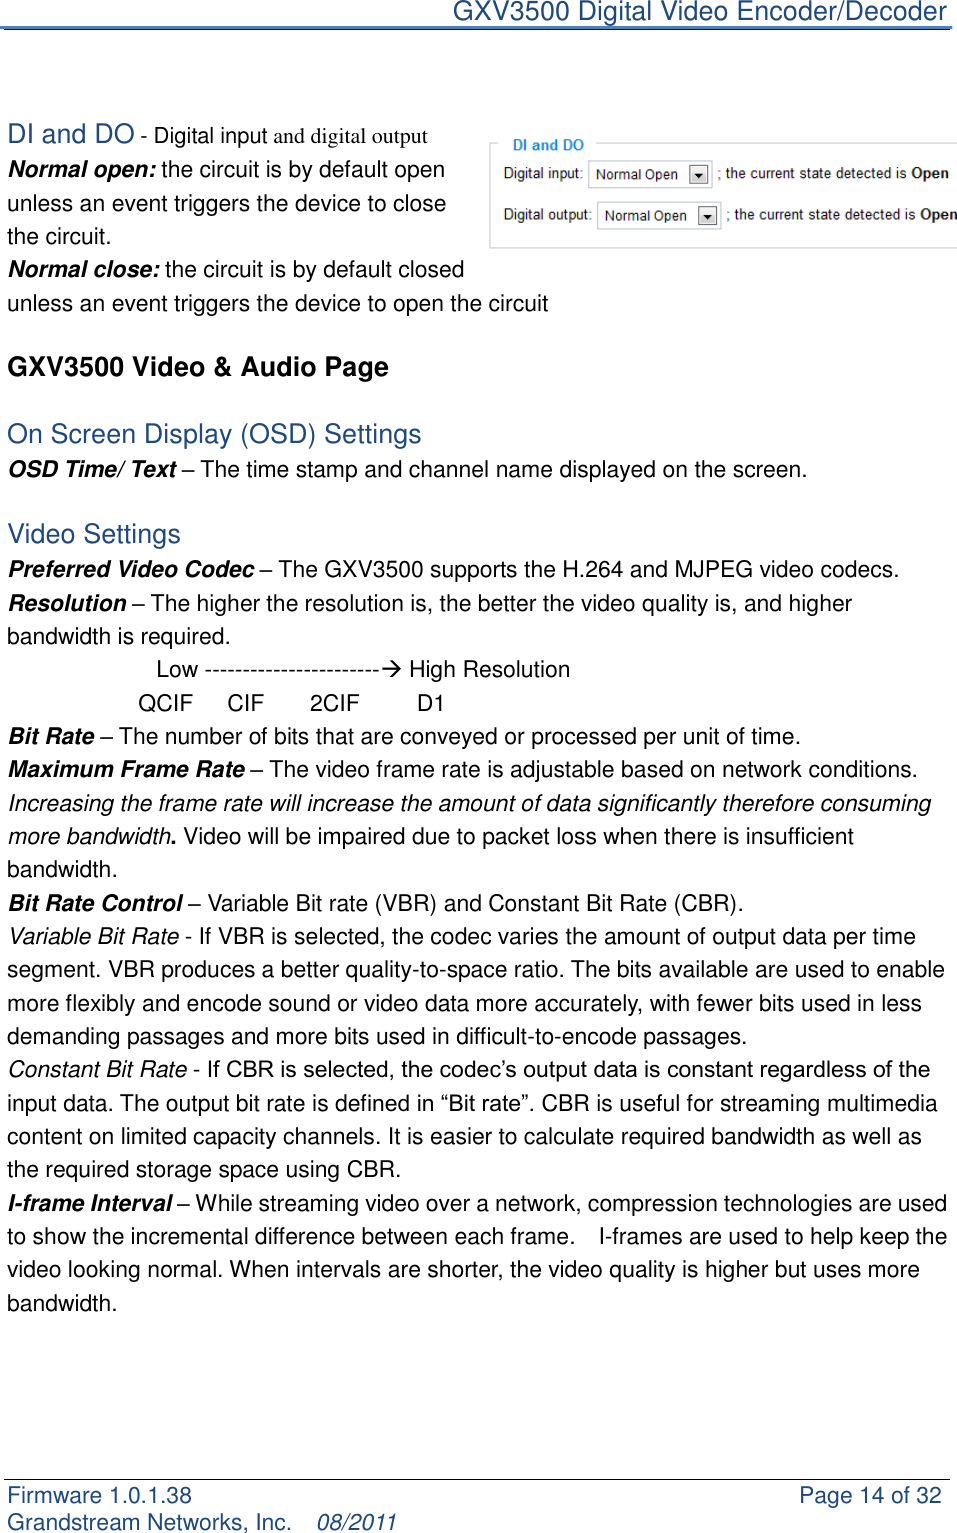     GXV3500 Digital Video Encoder/Decoder Firmware 1.0.1.38                                                     Page 14 of 32     Grandstream Networks, Inc.  08/2011    DI and DO - Digital input and digital output Normal open: the circuit is by default open unless an event triggers the device to close the circuit. Normal close: the circuit is by default closed unless an event triggers the device to open the circuit  GXV3500 Video &amp; Audio Page  On Screen Display (OSD) Settings OSD Time/ Text – The time stamp and channel name displayed on the screen.  Video Settings Preferred Video Codec – The GXV3500 supports the H.264 and MJPEG video codecs. Resolution – The higher the resolution is, the better the video quality is, and higher bandwidth is required.                      Low ----------------------- High Resolution         QCIF      CIF        2CIF          D1                   Bit Rate – The number of bits that are conveyed or processed per unit of time. Maximum Frame Rate – The video frame rate is adjustable based on network conditions. Increasing the frame rate will increase the amount of data significantly therefore consuming more bandwidth. Video will be impaired due to packet loss when there is insufficient bandwidth. Bit Rate Control – Variable Bit rate (VBR) and Constant Bit Rate (CBR). Variable Bit Rate - If VBR is selected, the codec varies the amount of output data per time segment. VBR produces a better quality-to-space ratio. The bits available are used to enable more flexibly and encode sound or video data more accurately, with fewer bits used in less demanding passages and more bits used in difficult-to-encode passages.  Constant Bit Rate - If CBR is selected, the codec‟s output data is constant regardless of the input data. The output bit rate is defined in “Bit rate”. CBR is useful for streaming multimedia content on limited capacity channels. It is easier to calculate required bandwidth as well as the required storage space using CBR. I-frame Interval – While streaming video over a network, compression technologies are used to show the incremental difference between each frame.    I-frames are used to help keep the video looking normal. When intervals are shorter, the video quality is higher but uses more bandwidth.  